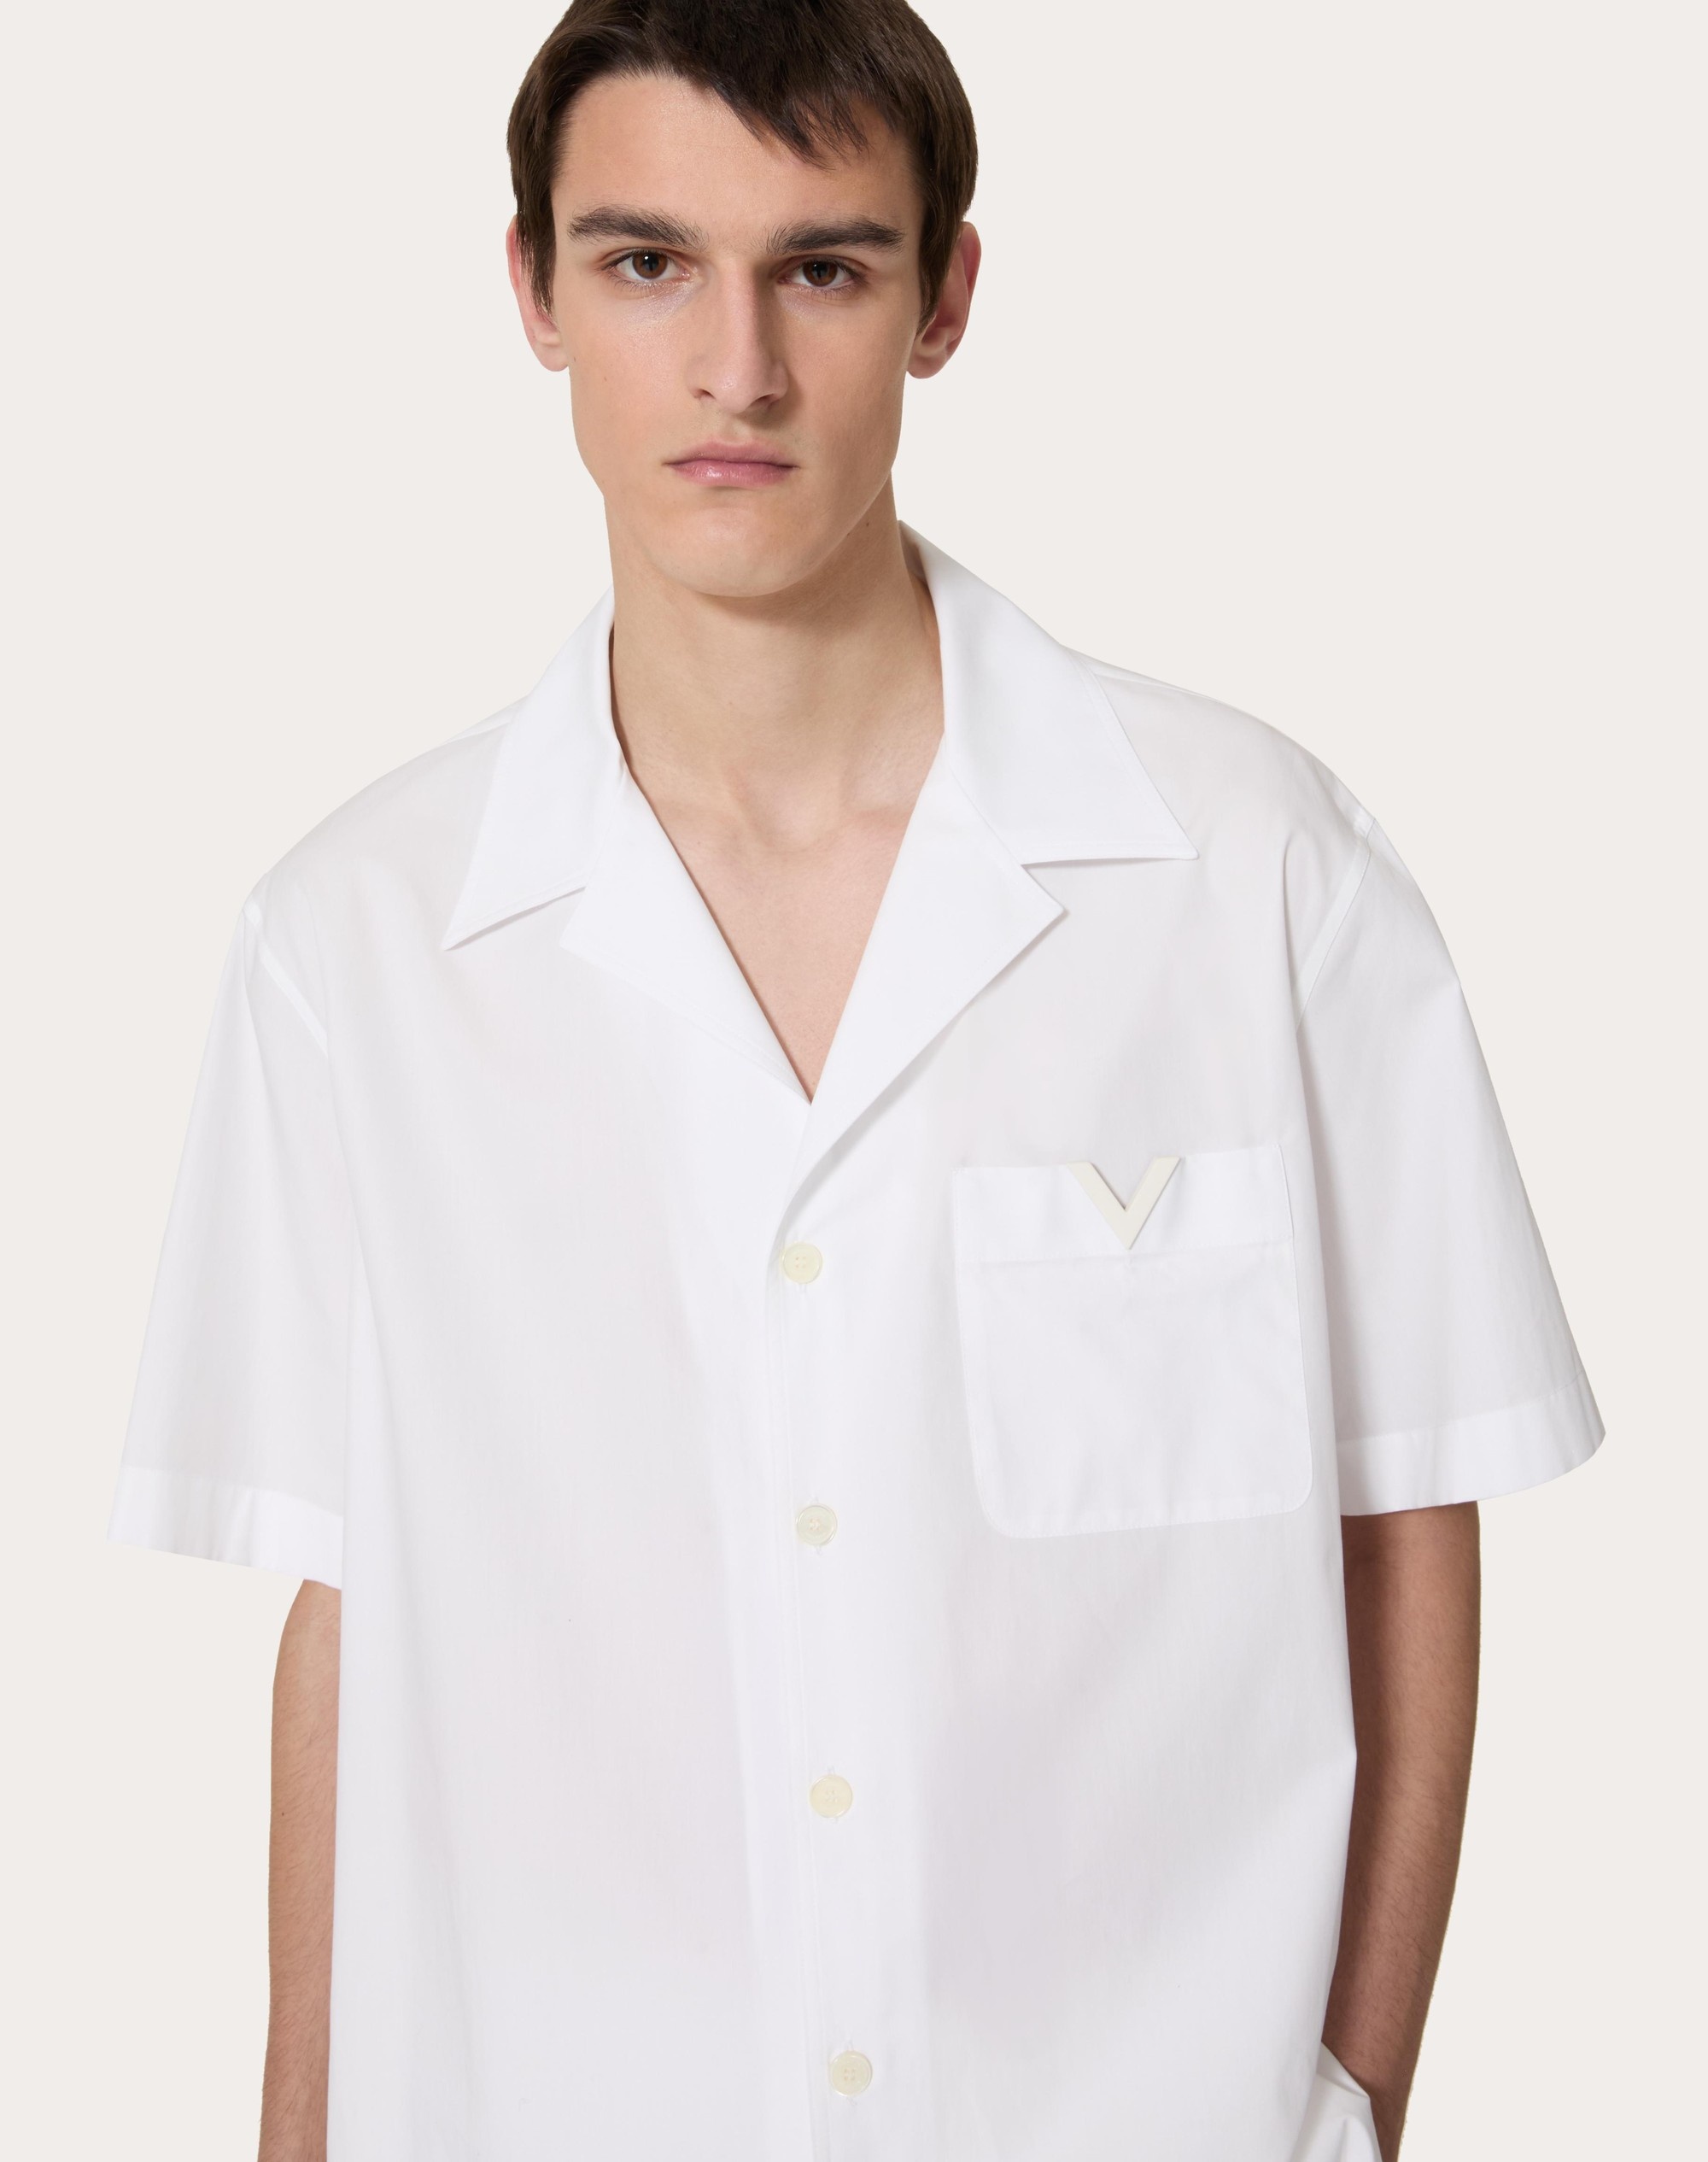 COTTON POPLIN BOWLING SHIRT WITH RUBBERIZED V DETAIL - 5